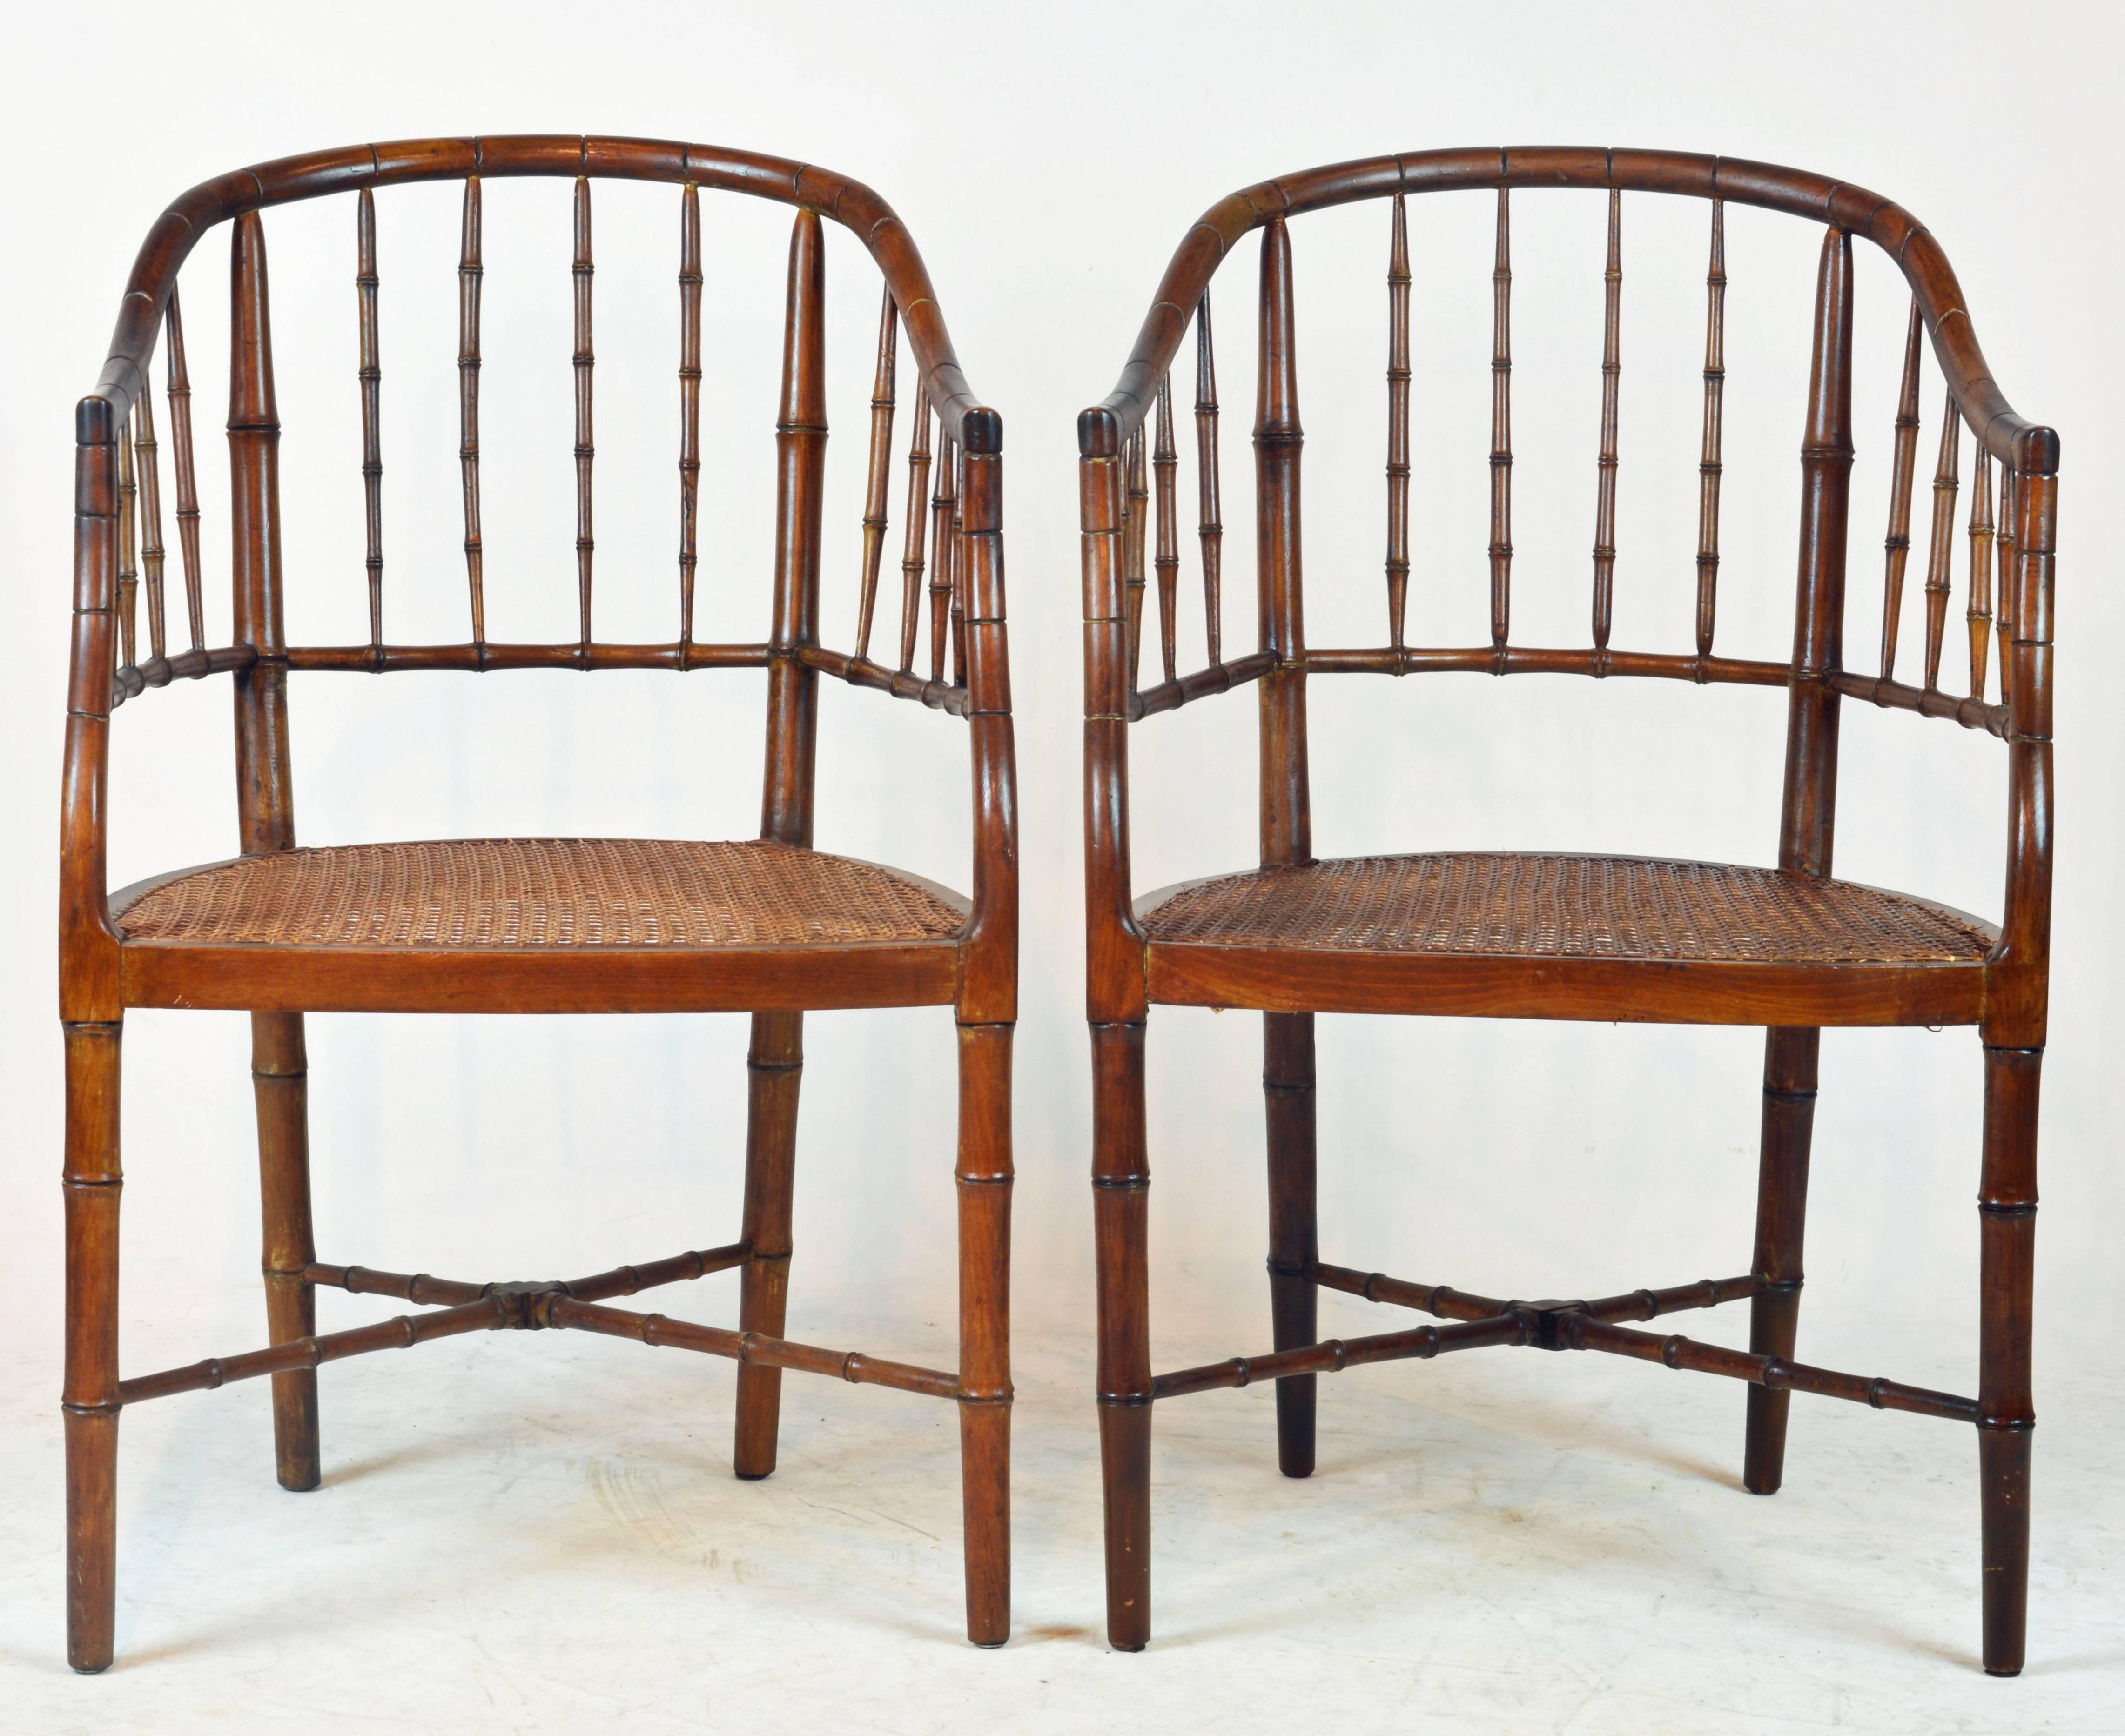 These chairs are not modern replicas but a good pair of iconic 19th century. Regency period chairs with slender but sturdy design, refined detail and newly replaced handwoven cane seats.